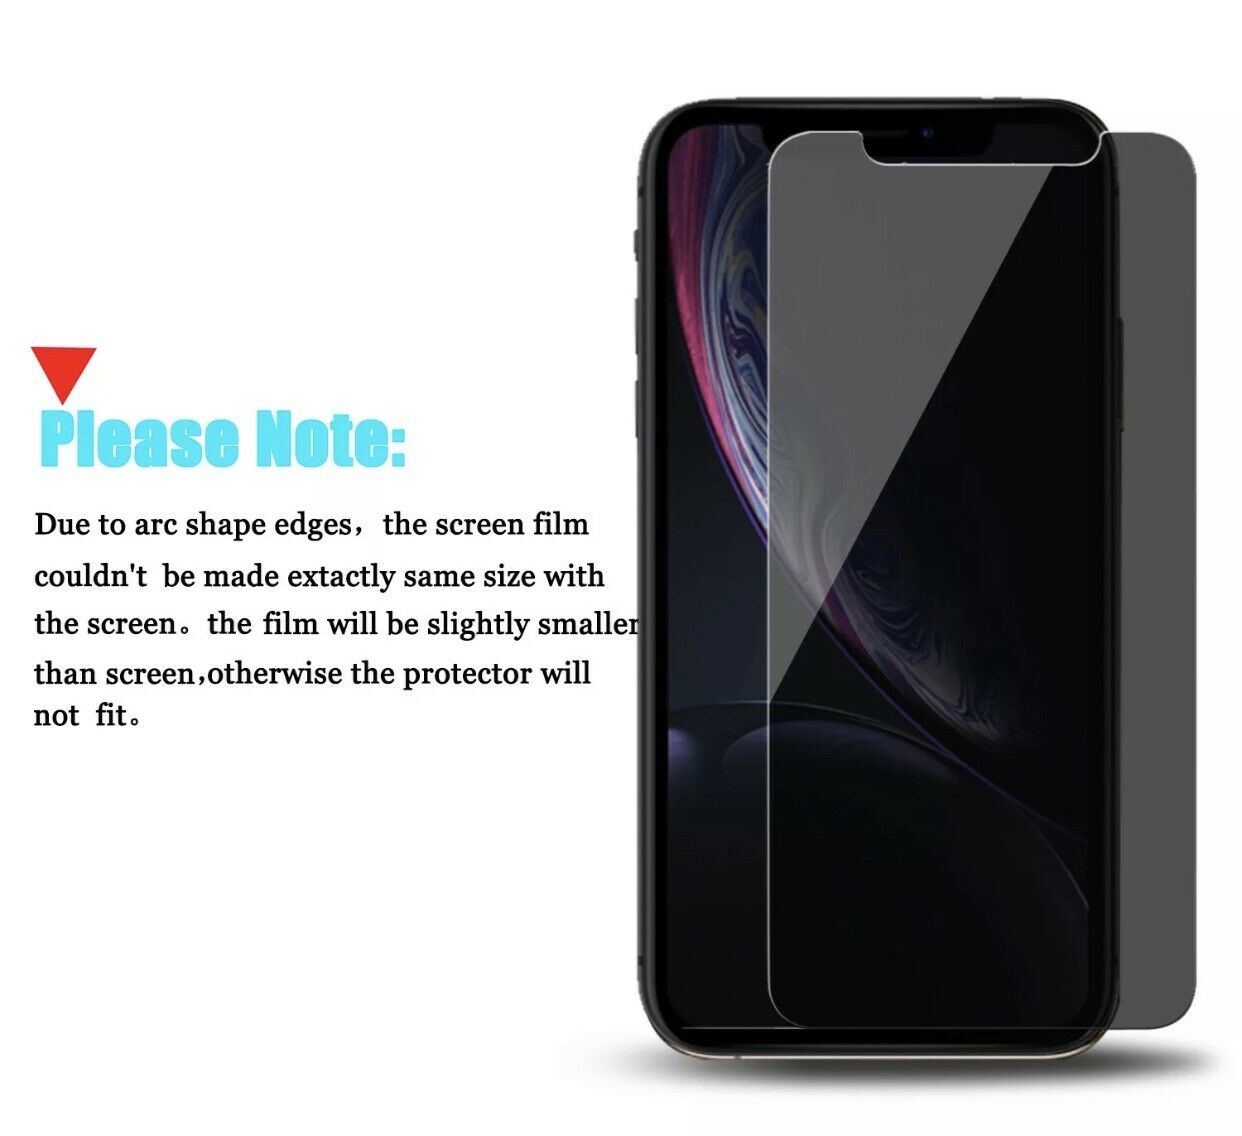 2x Privacy Tempered Glass Anti-Spy Screen Protector For iPhone 11 Pro XS Max XR binc.marke 